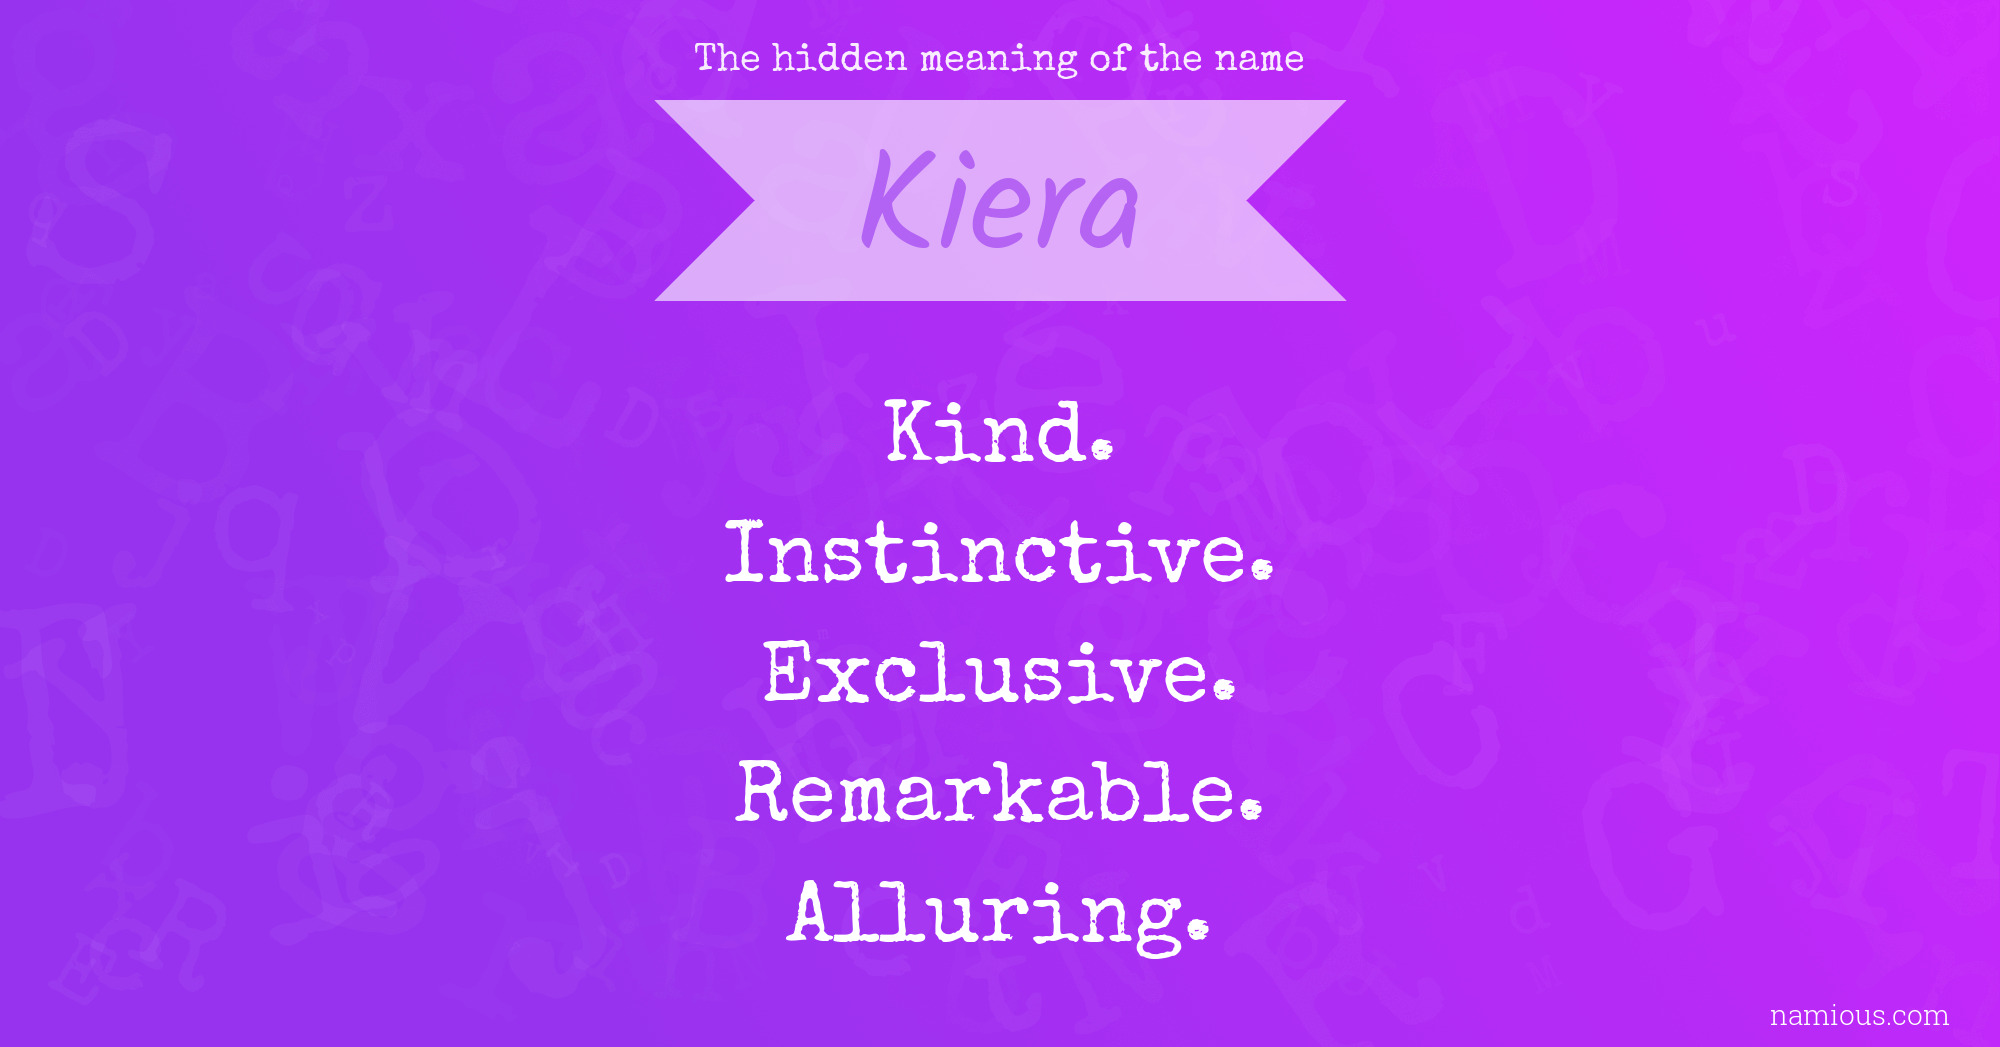 The hidden meaning of the name Kiera